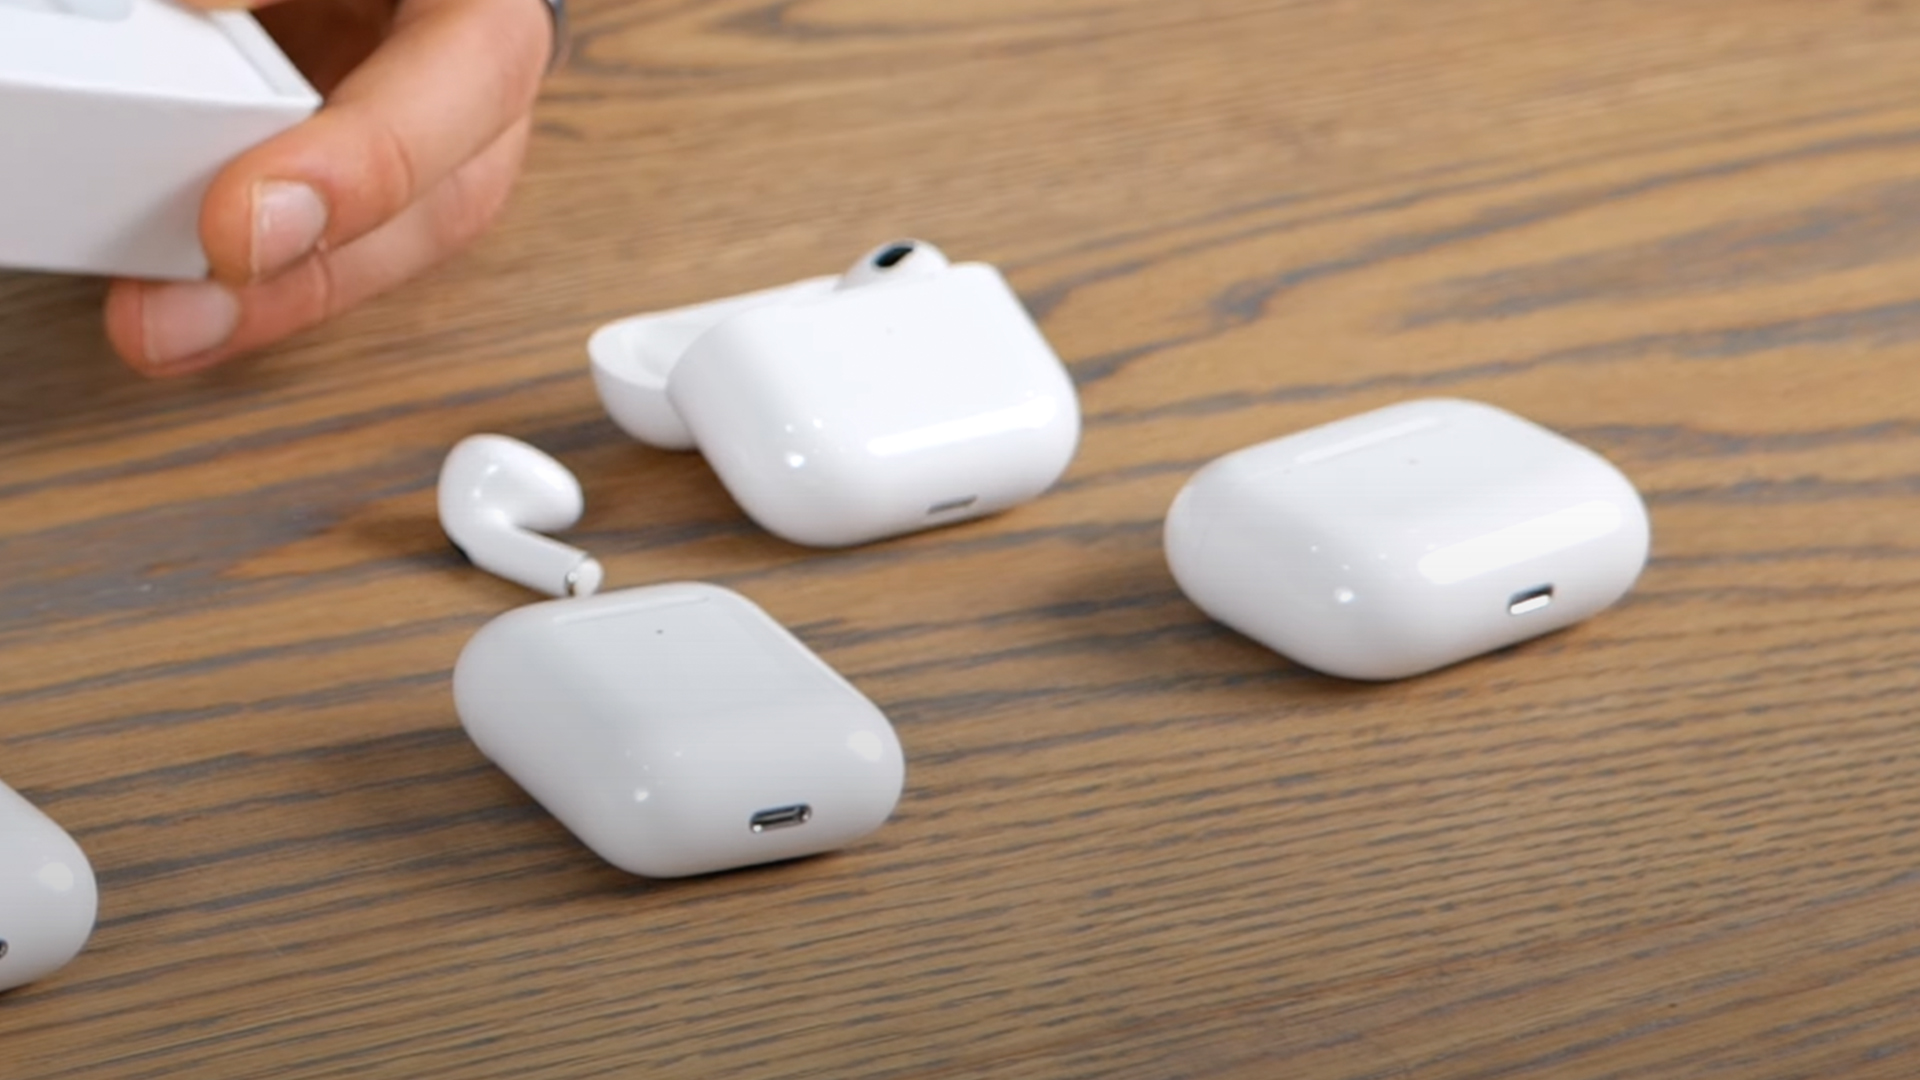 Sketchy rumor claims Apple will launch AirPods 3 on May 18